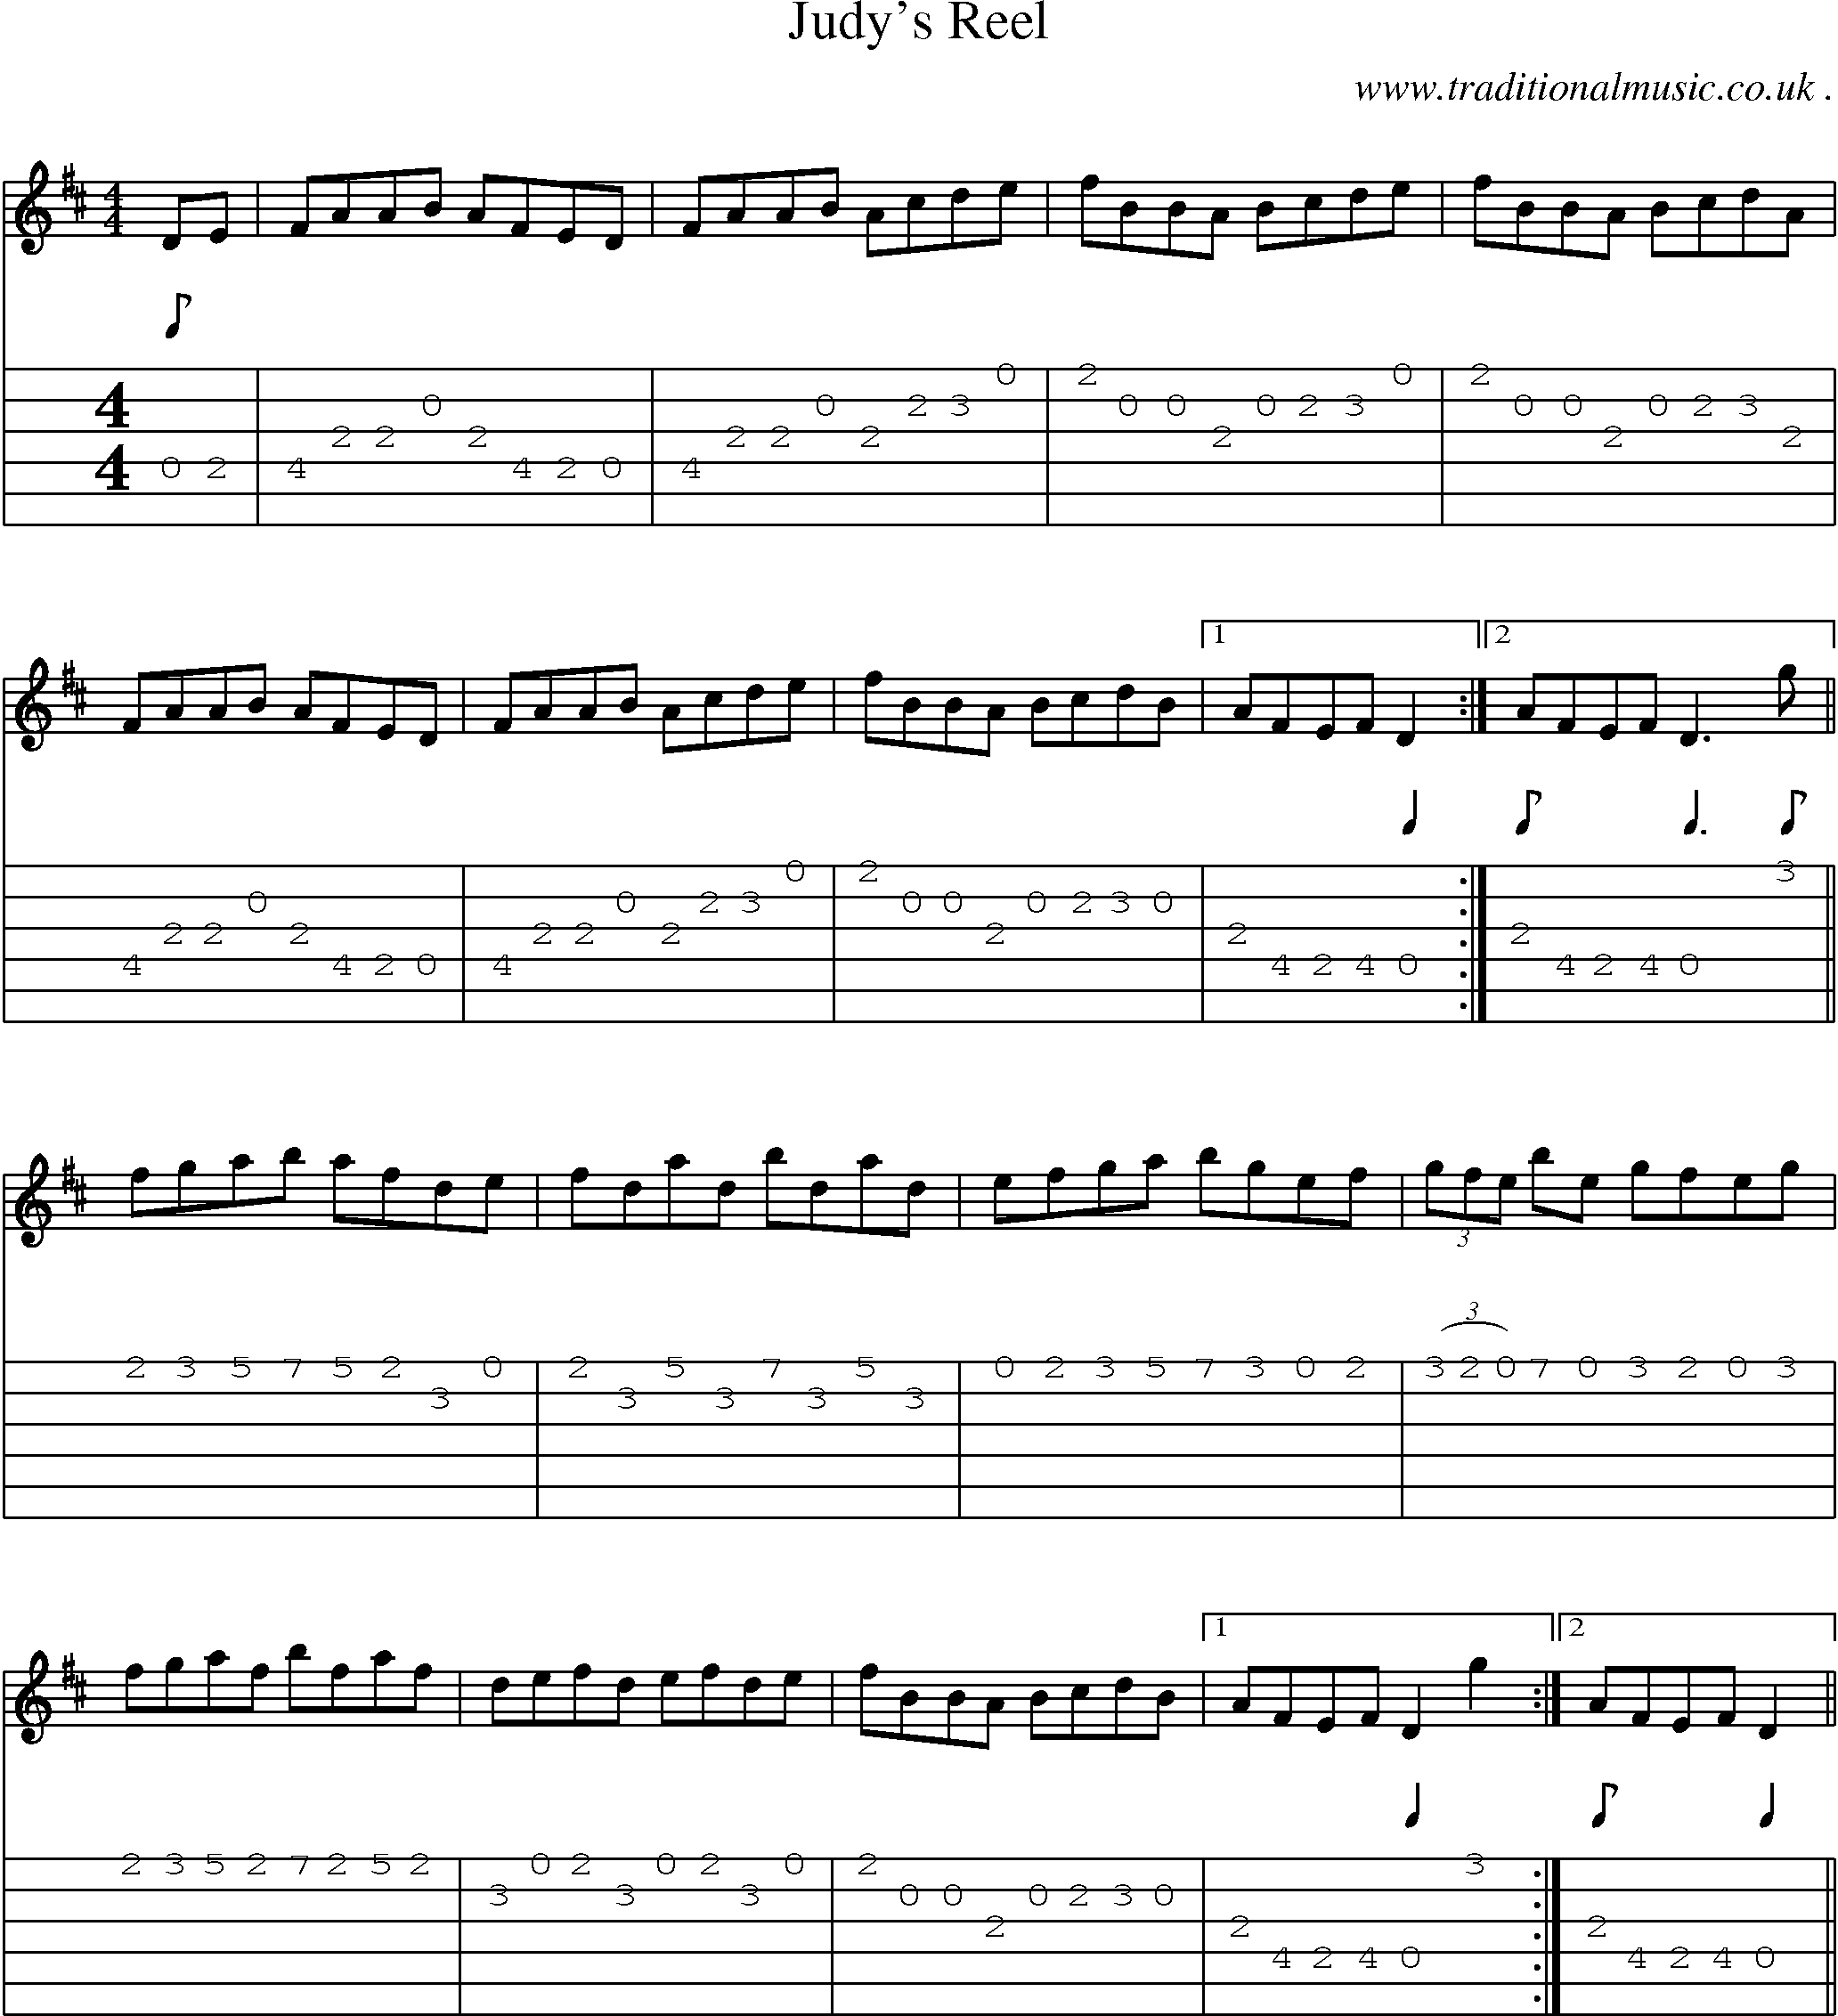 Music Score and Guitar Tabs for Judys Reel